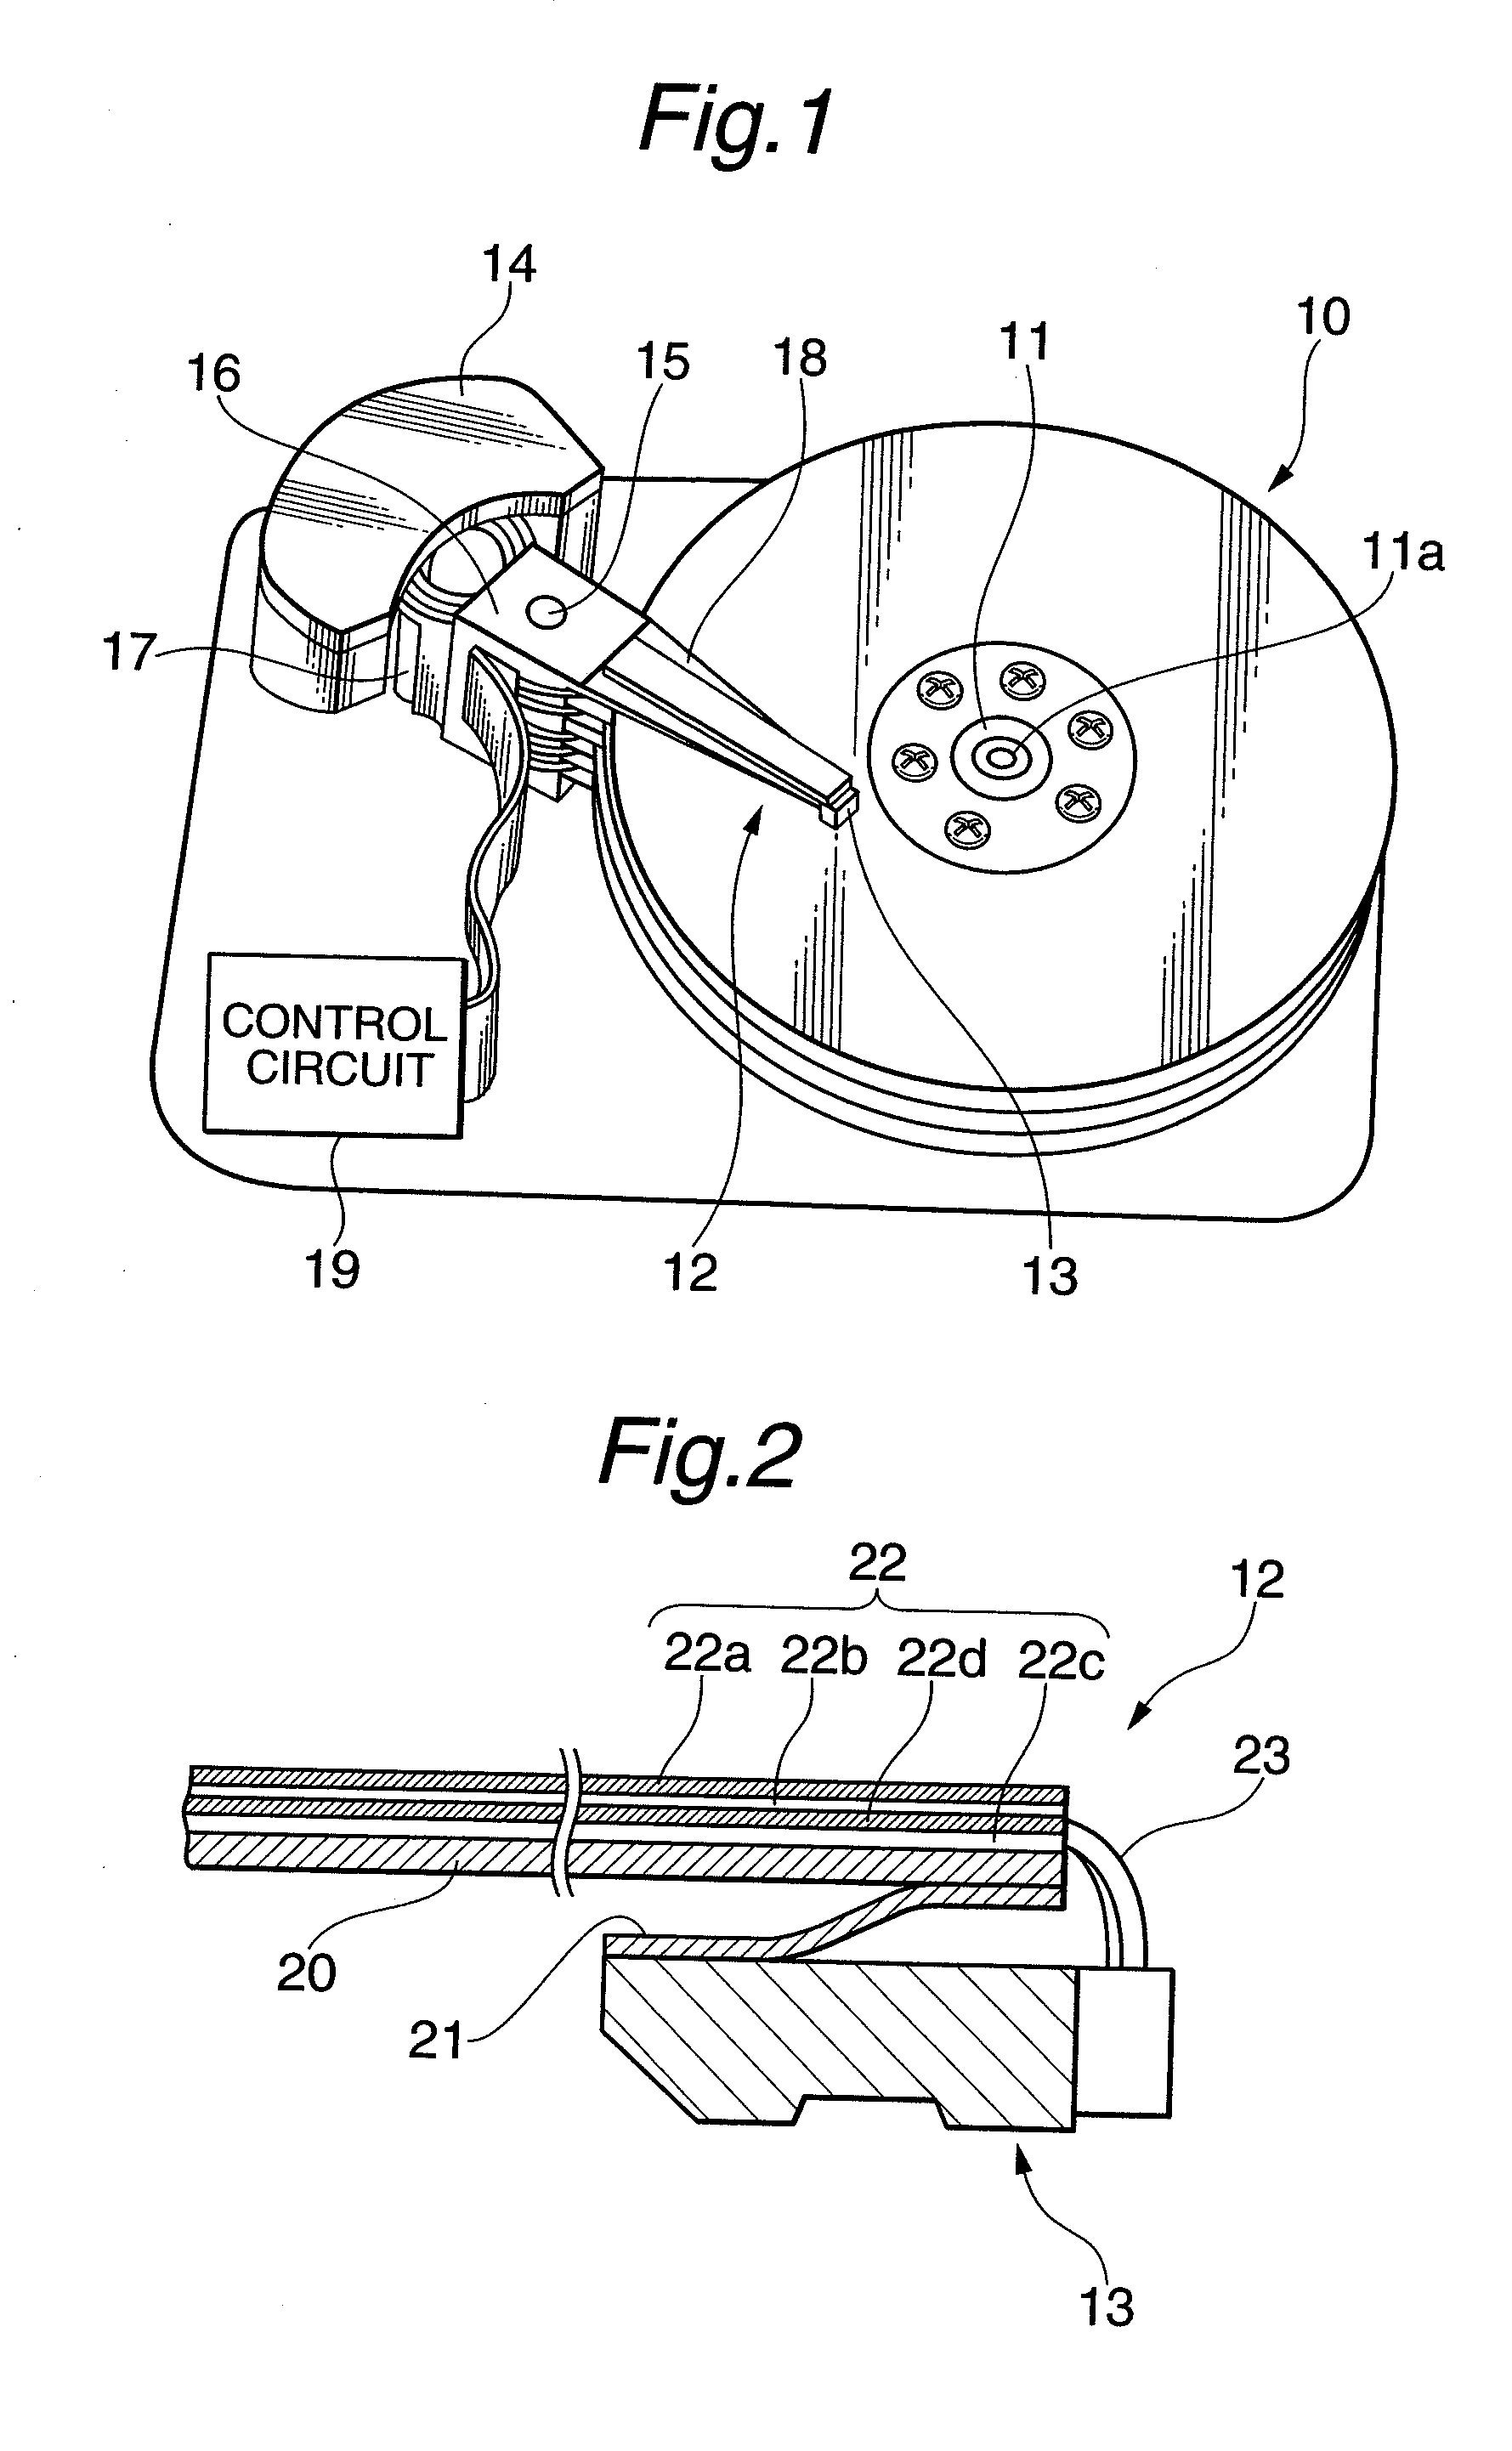 Magnetic Recording Apparatus Provided with Microwave-Assisted Head